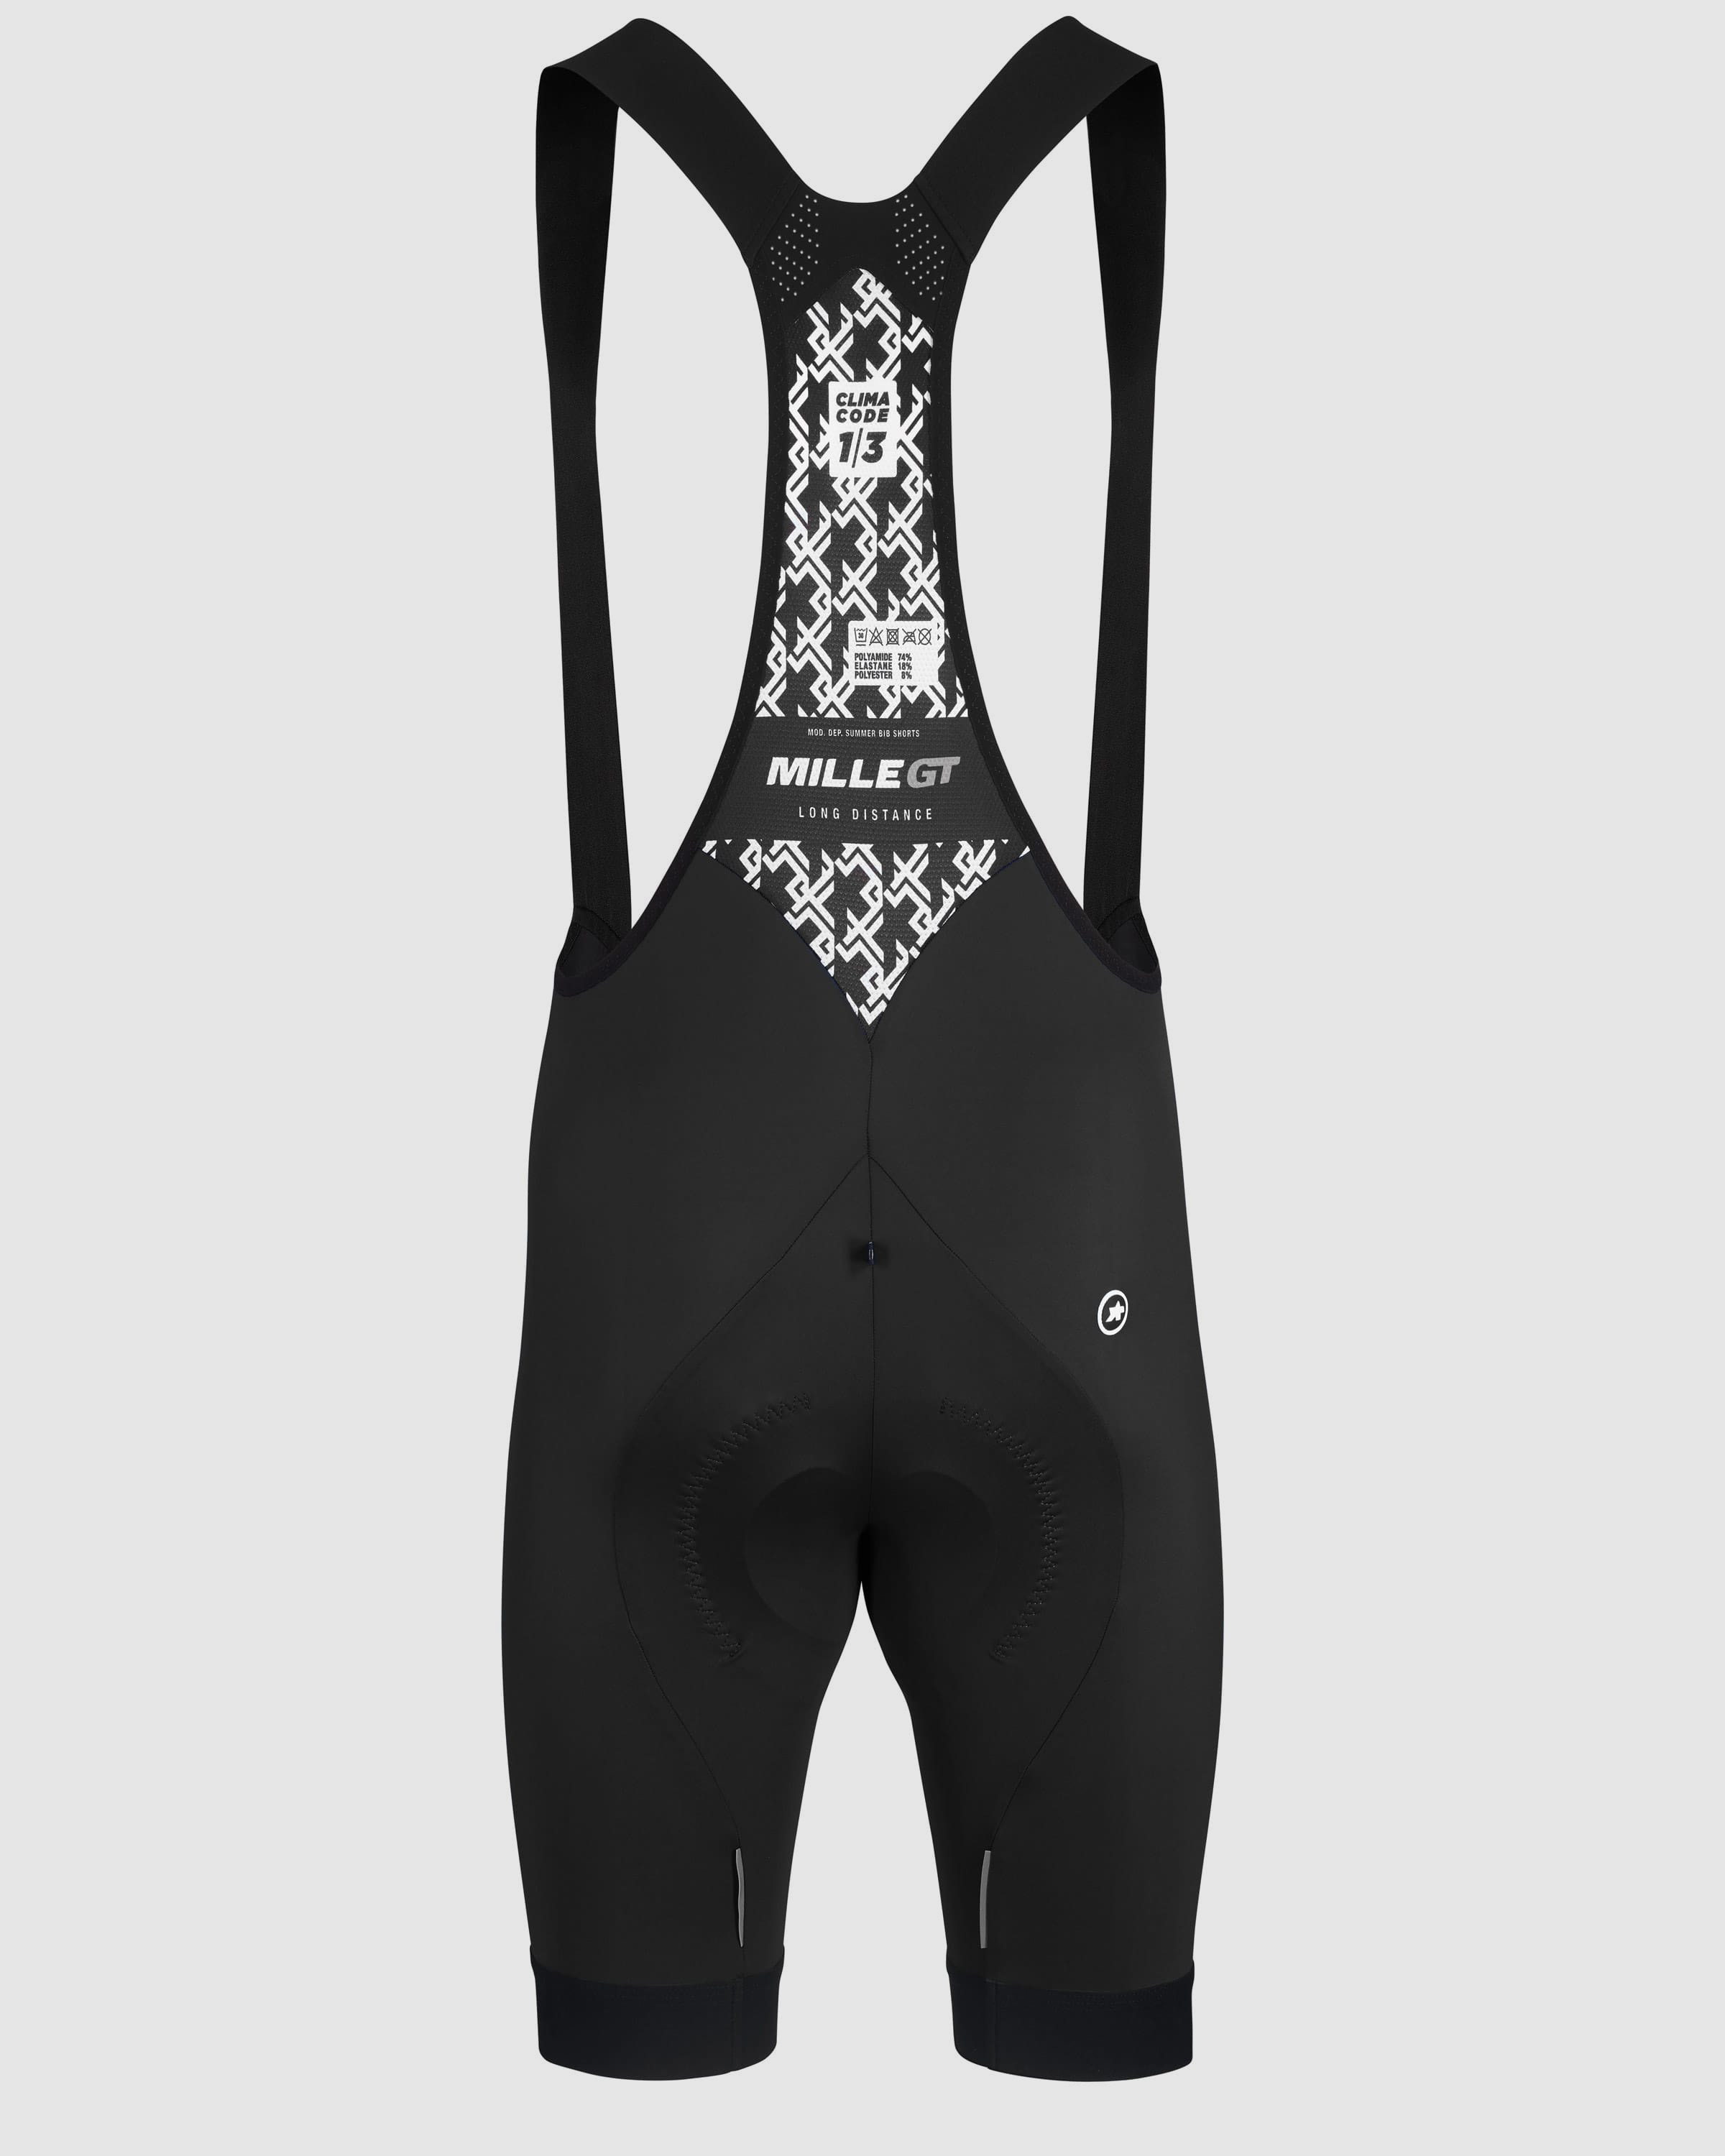 MILLE GT Bib Shorts - ASSOS Of Switzerland - Official Outlet